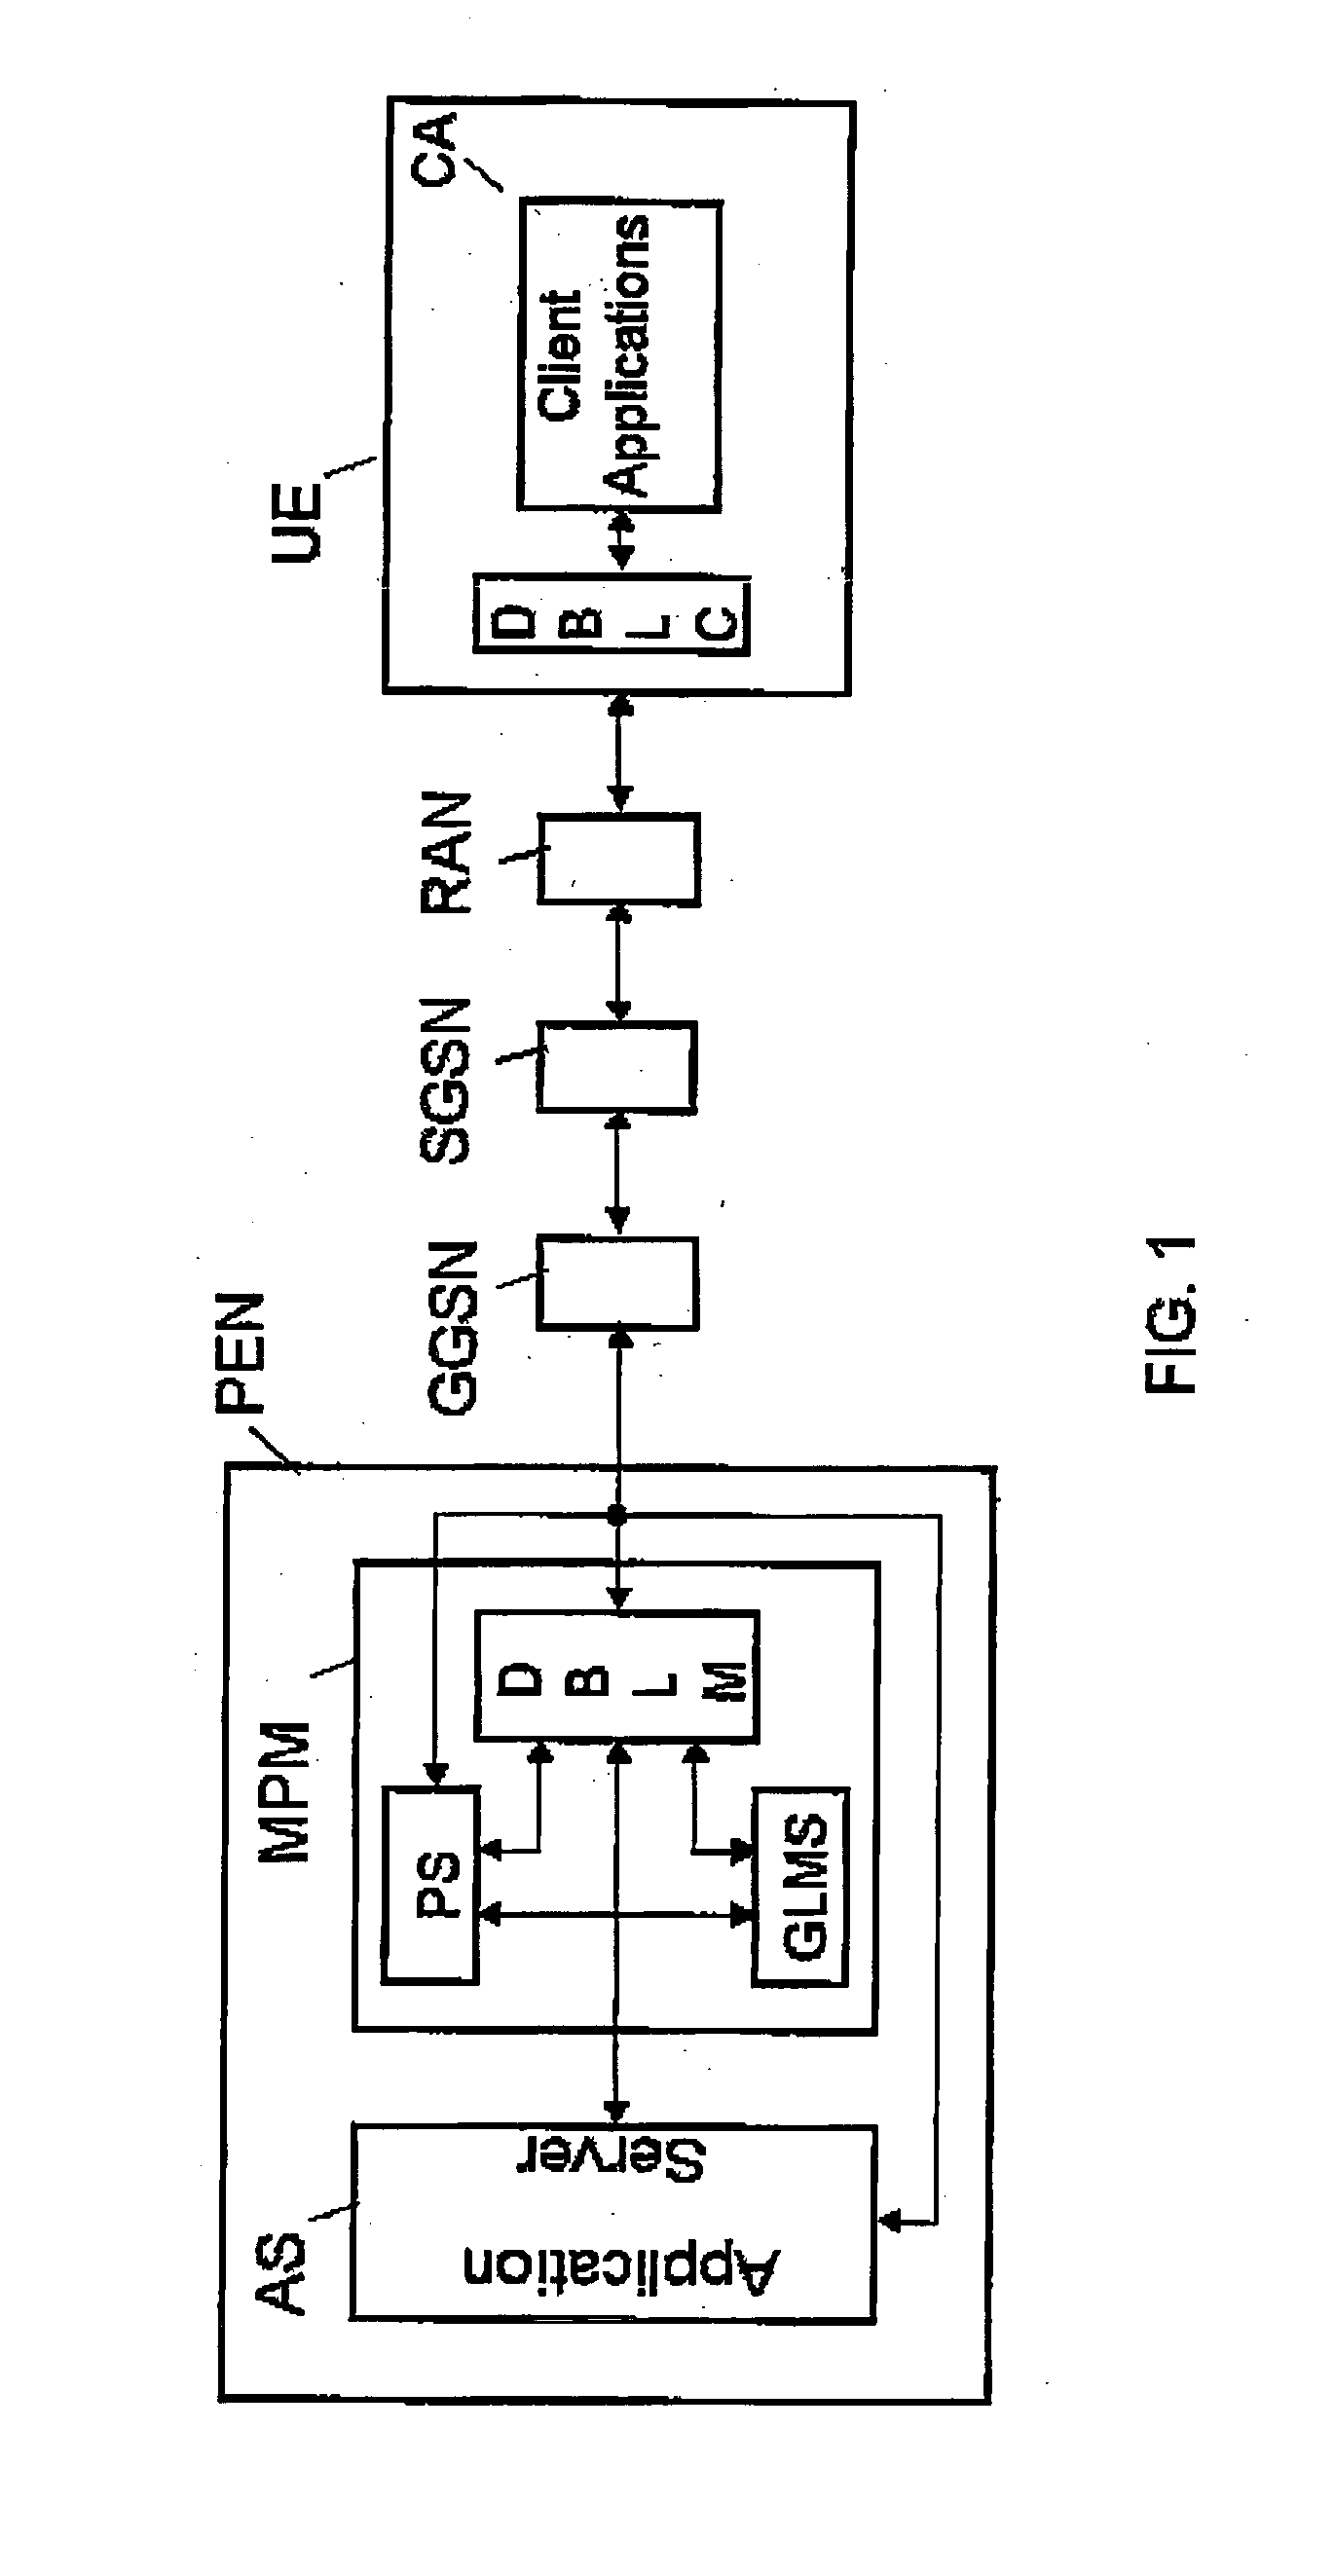 Method of and apparatus for server-side management of buddy lists in presence based services provided by a communication system